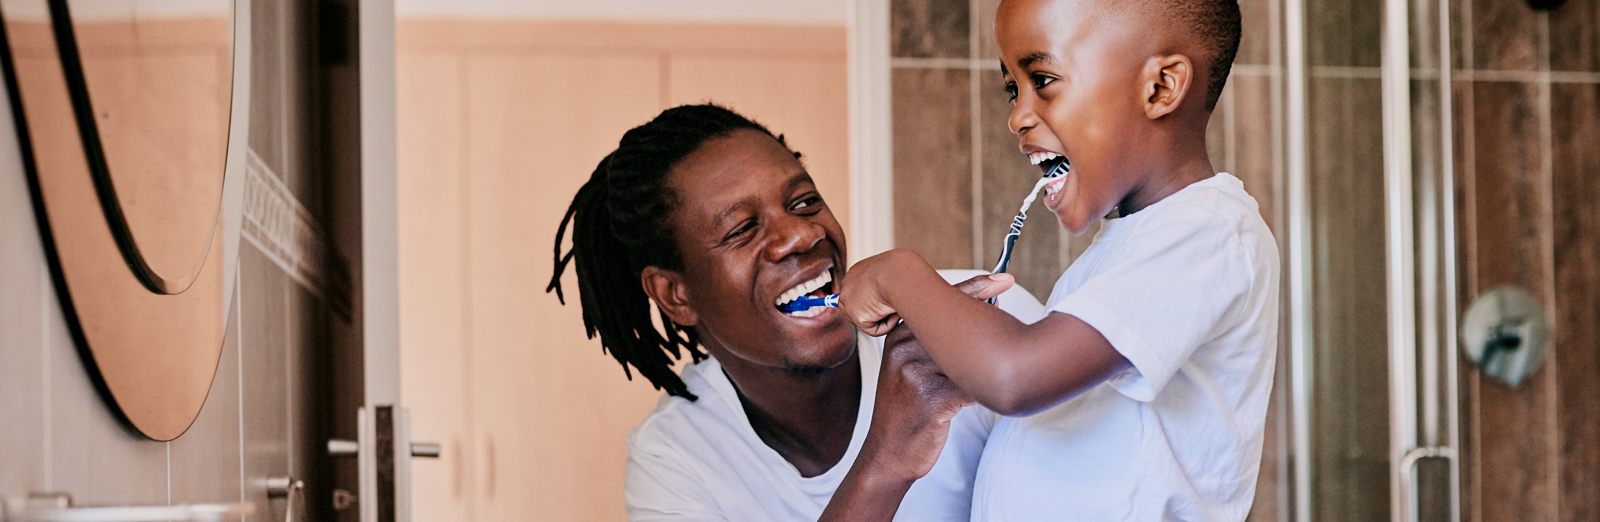 father-and-son-brushing-teeth-1600x522.png